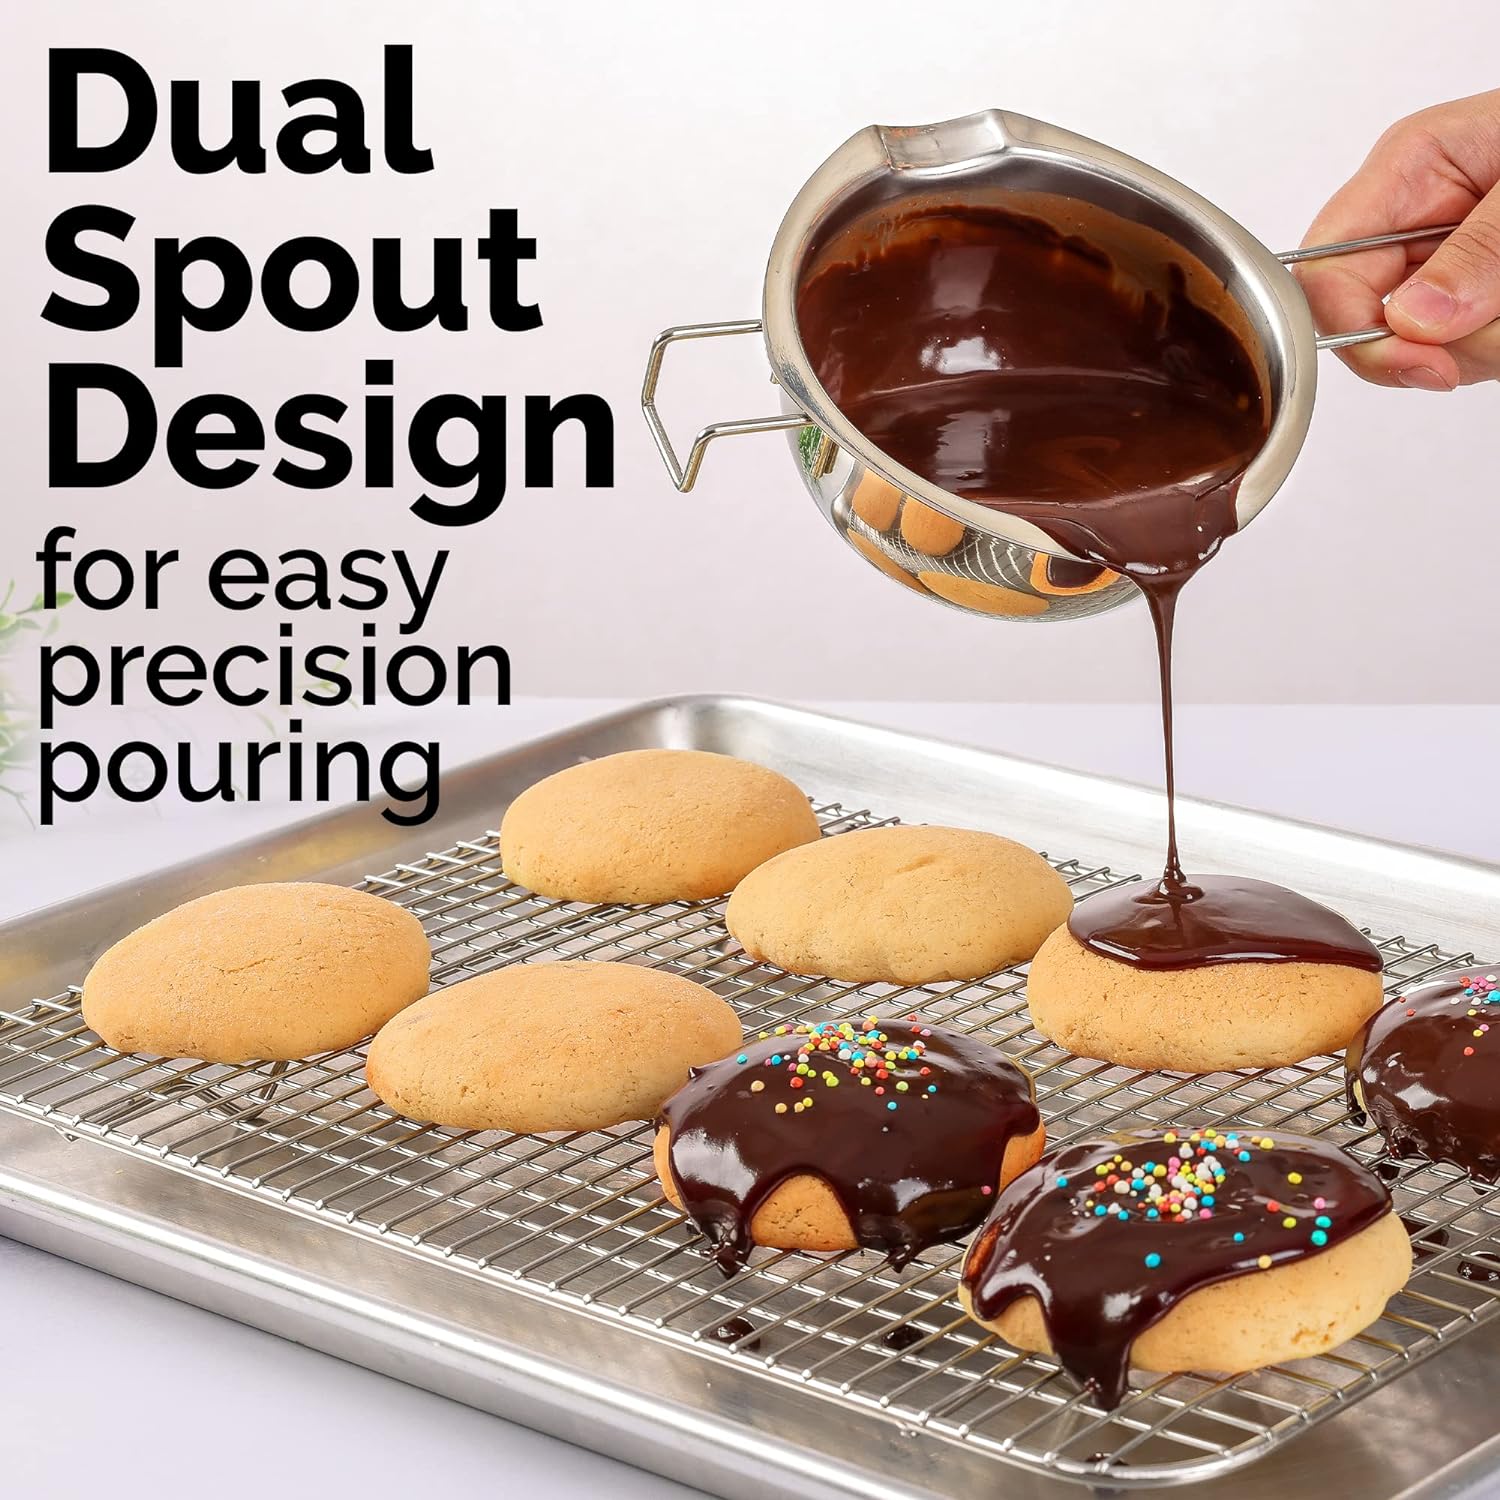 Zulay Kitchen Double Boiler Chocolate Melting Pot - Silver - 222 requests